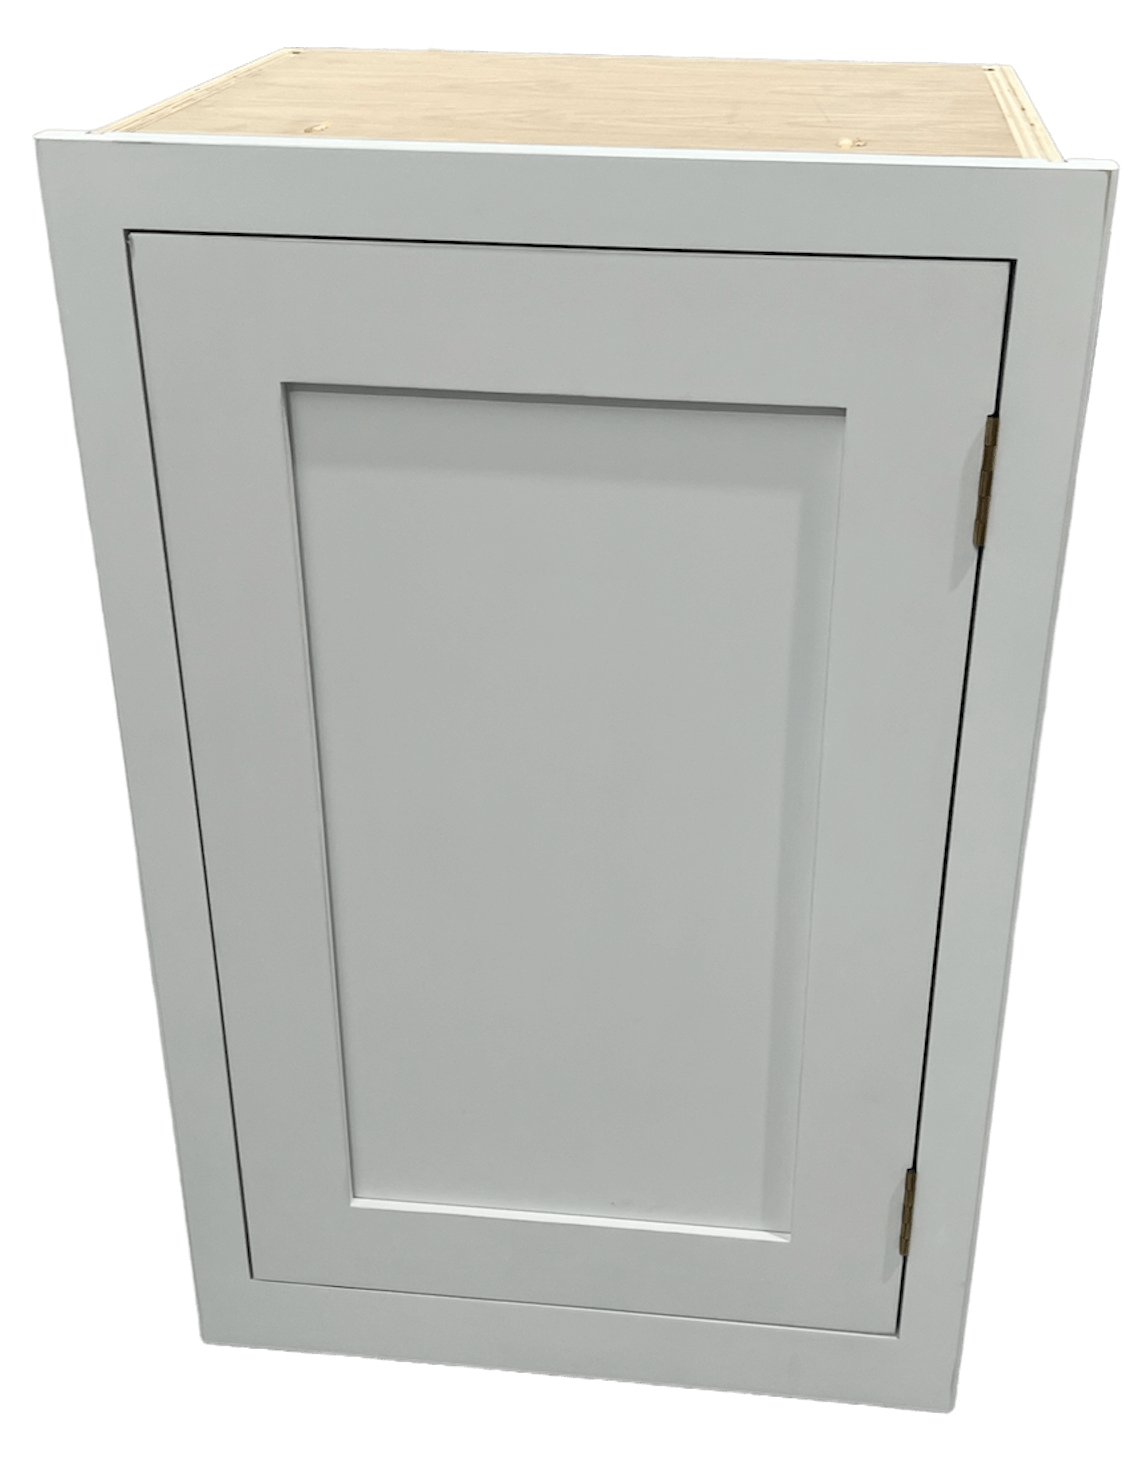 WC 500 - 500mm Single door Wall Cabinet - Classic Kitchens Direct